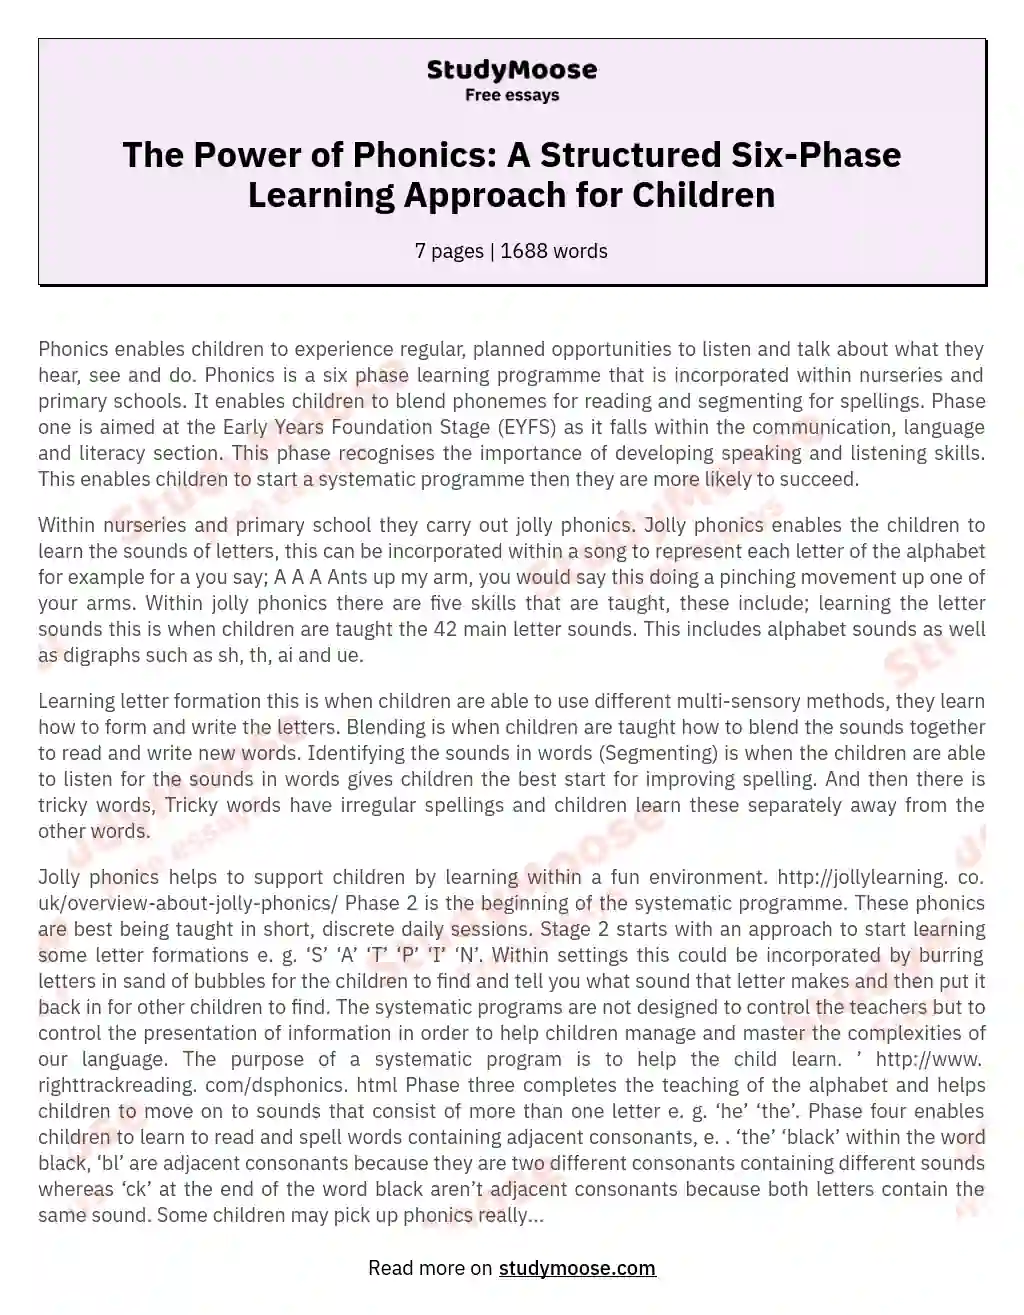 The Power of Phonics: A Structured Six-Phase Learning Approach for Children essay